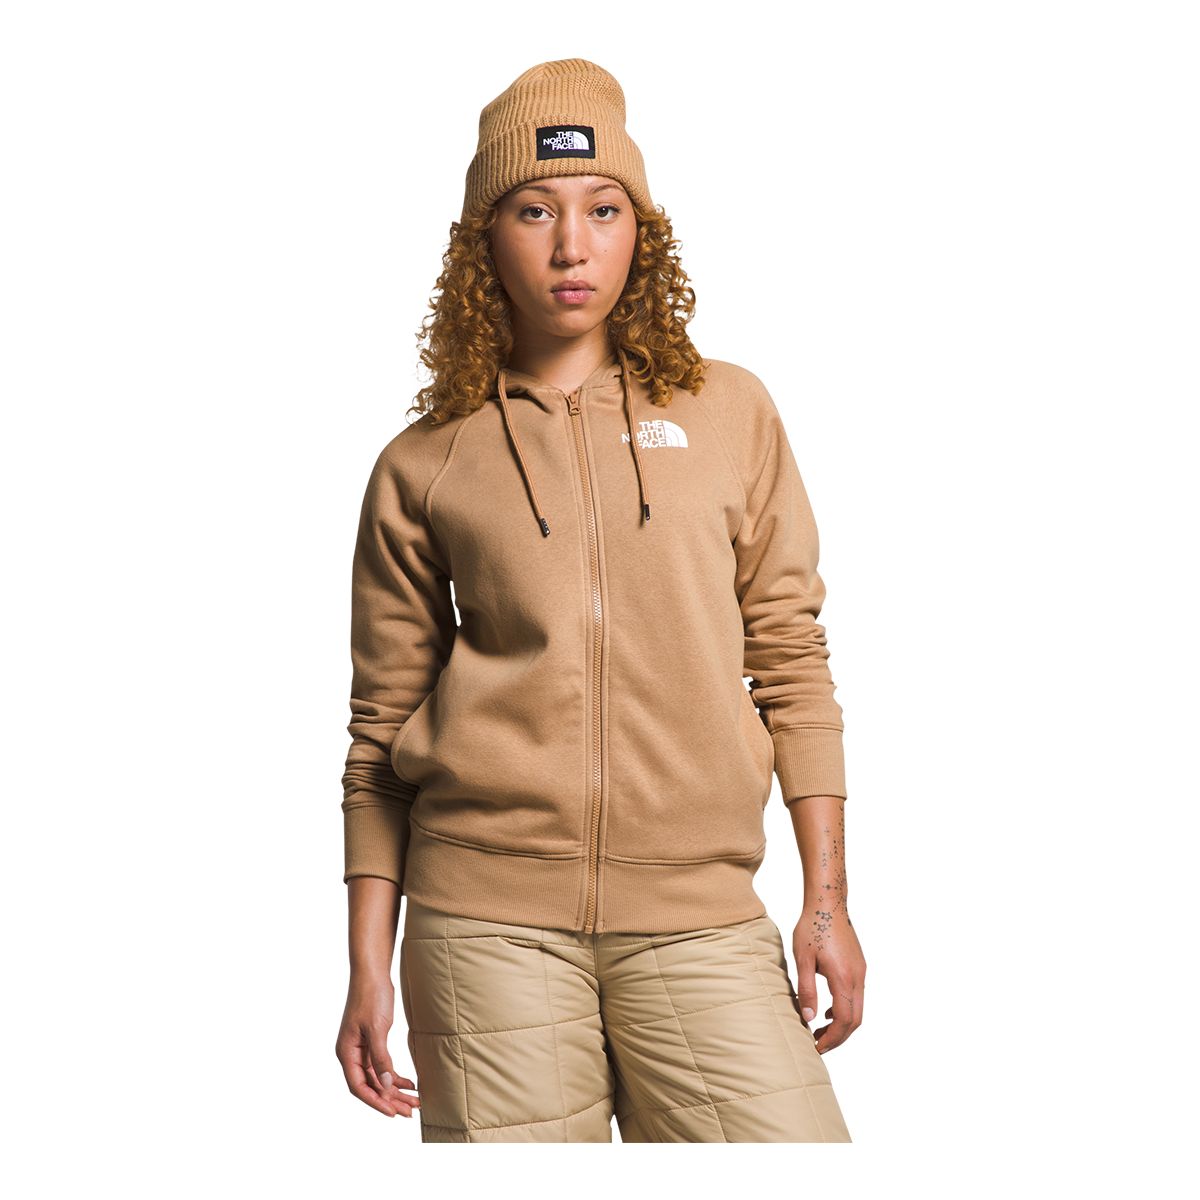 Image of The North Face Women's Brand Proud Full Zip Hoodie